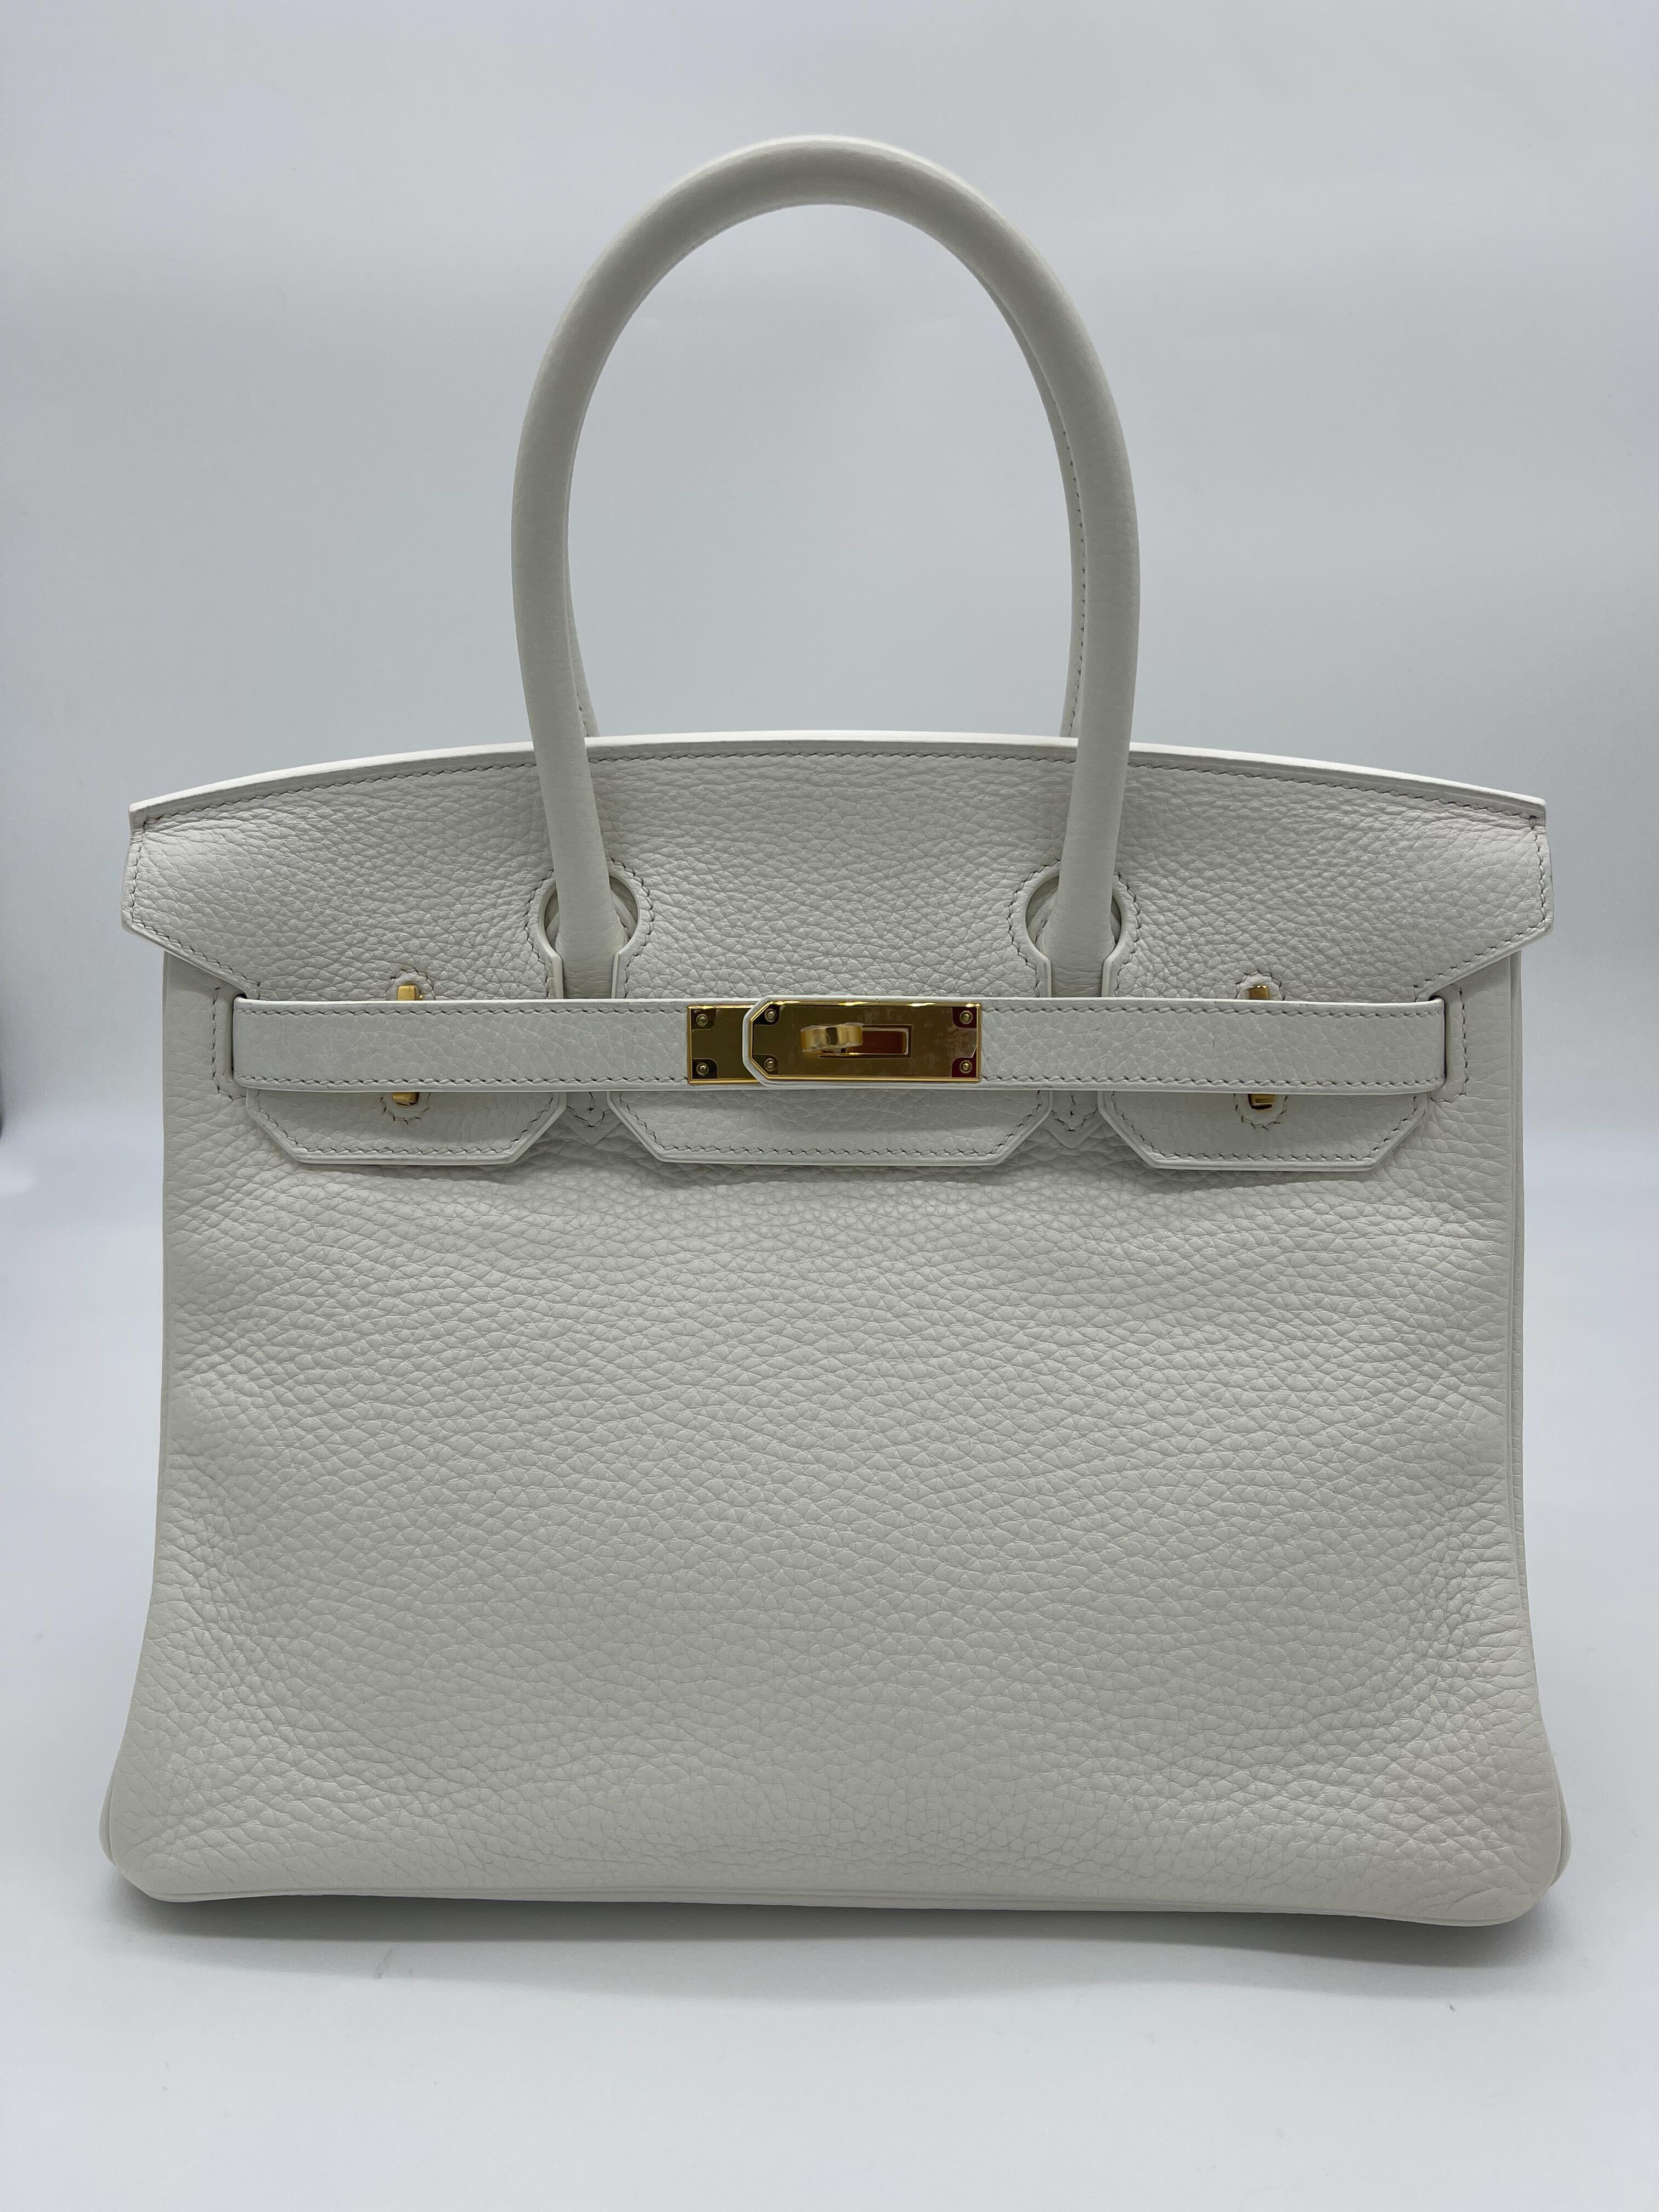 Hermes Birkin 30 White Togo Leather Gold Hardware

Condition: Pre-owned (like new)
Measurements: (W)30cm × (H)22cm × (D)16cm
Bag Material: Togo Leather
Hardware Material: Gold plated
 
*Comes with full original packaging. 
*Includes original Hermes